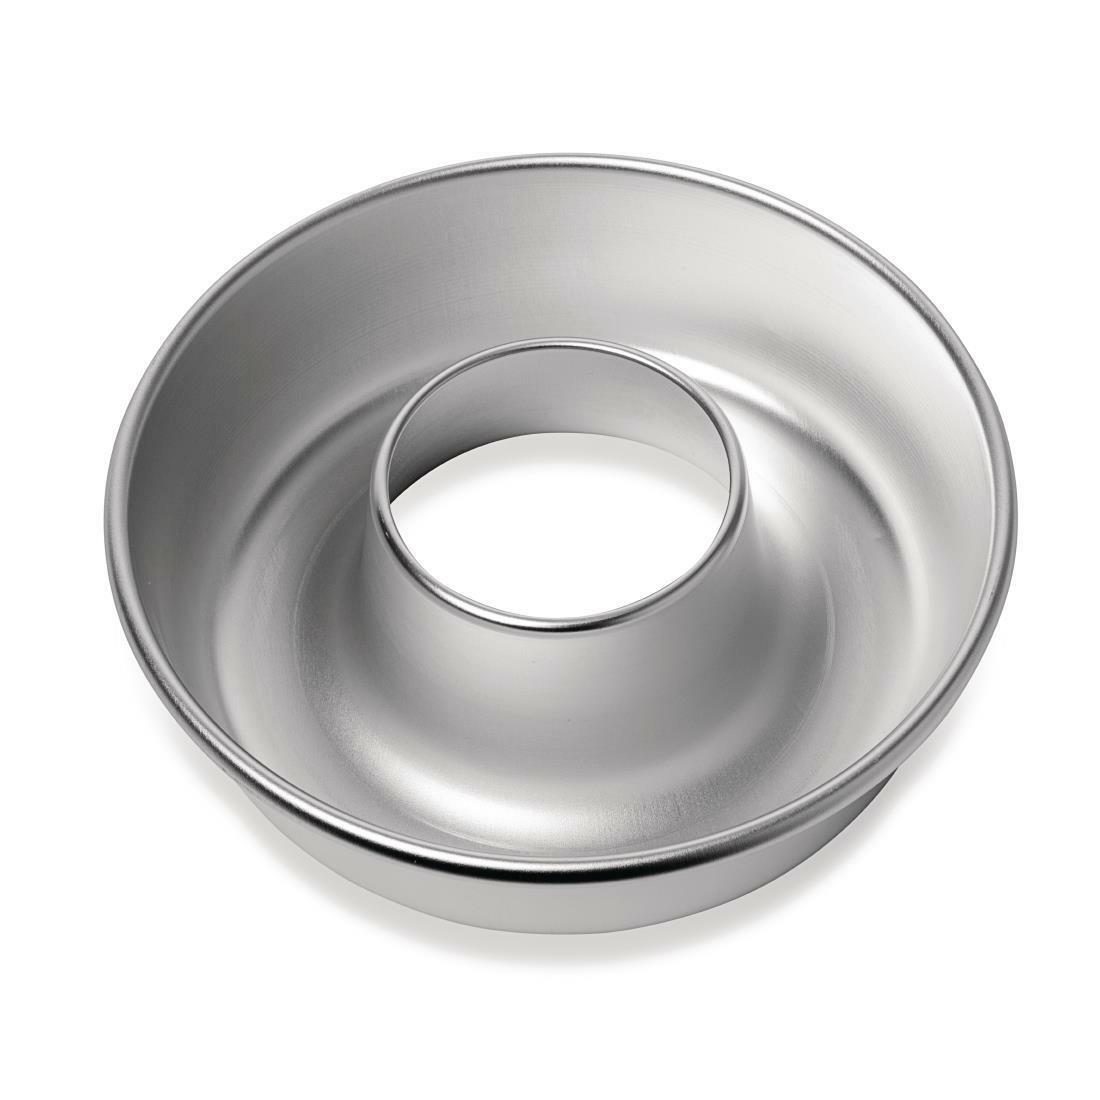 Stainless Steel Ring Mold 3 x 1 3/4 (7.6 x 4.4 cm) - Mercer Culinary